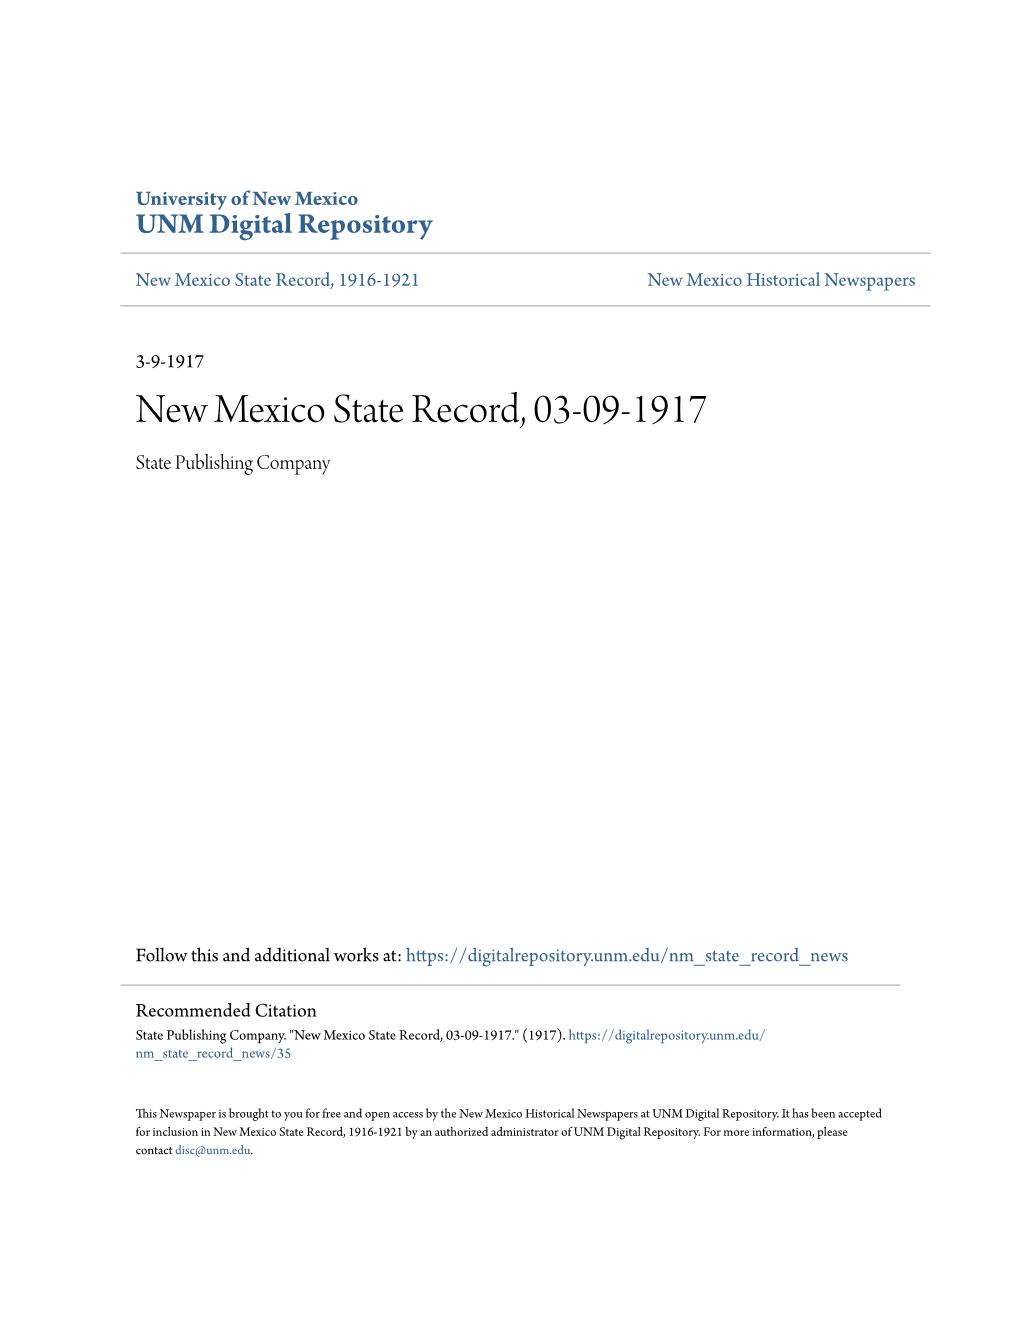 New Mexico State Record, 03-09-1917 State Publishing Company